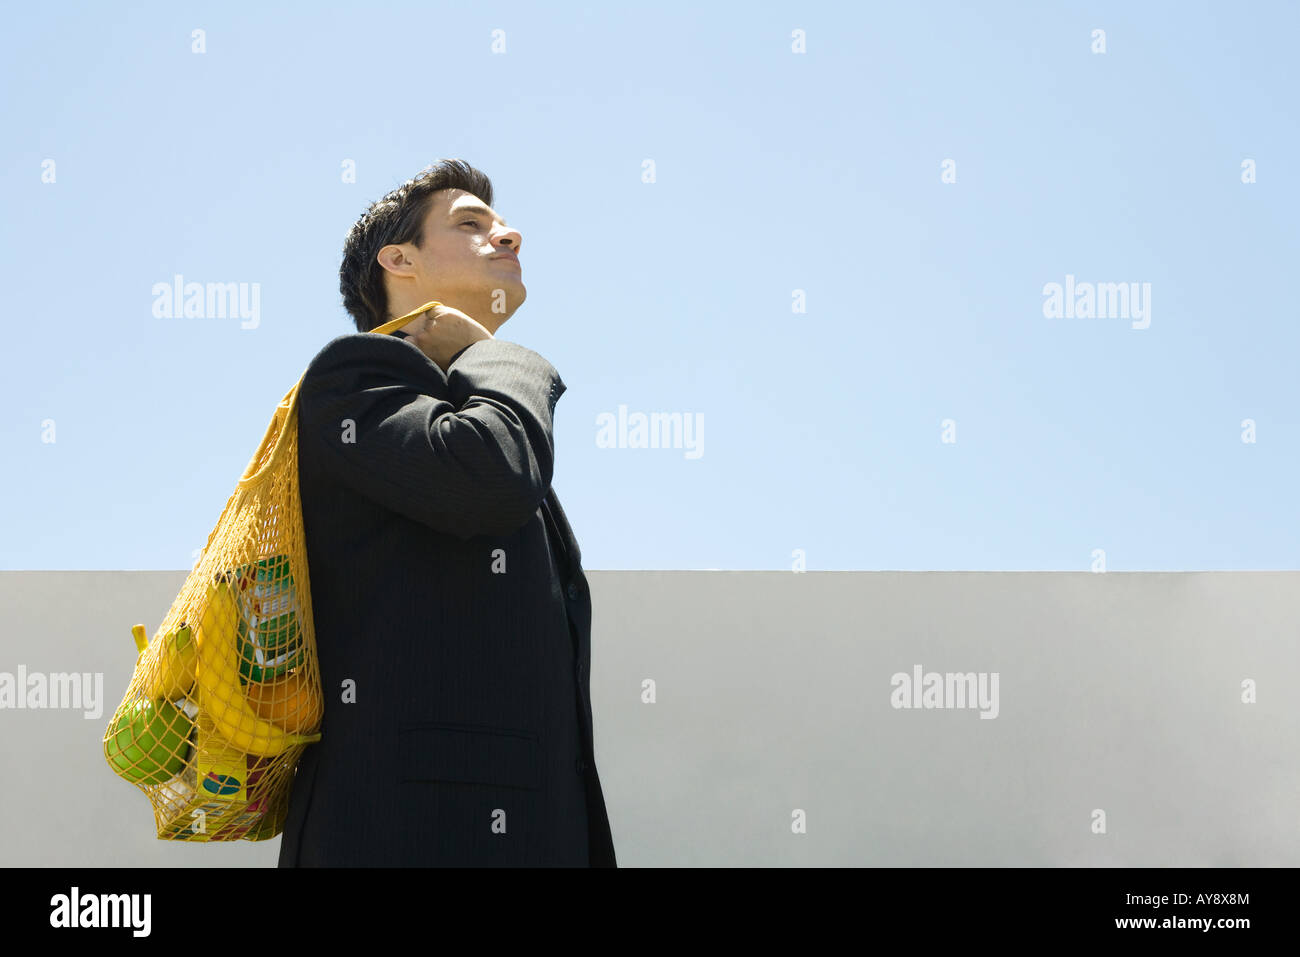 Businessman carrying groceries over shoulder Stock Photo